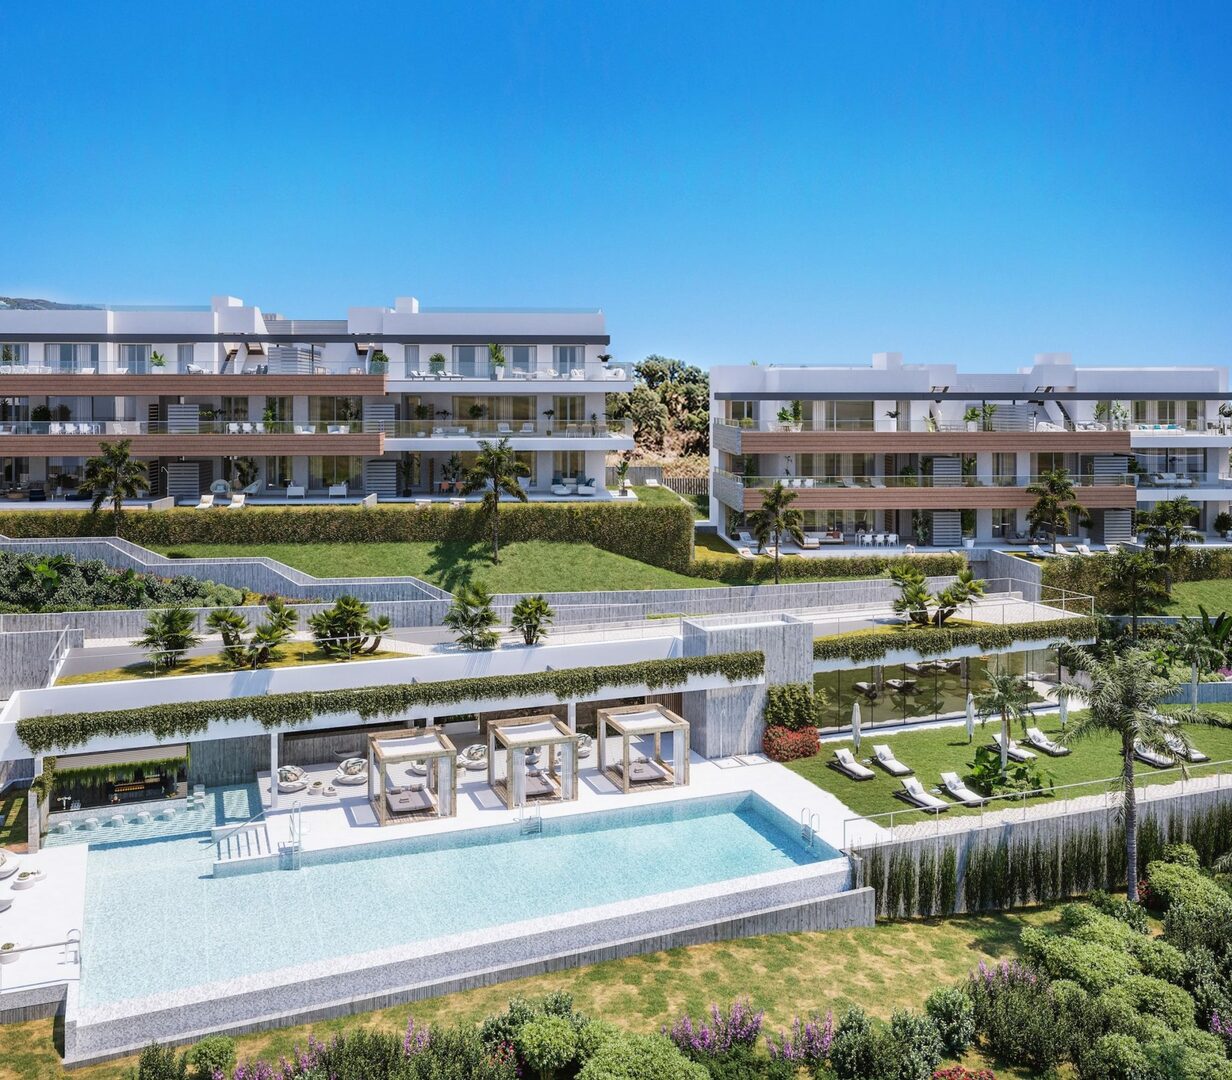 Apartment residential complex in Marbella surrounded by nature